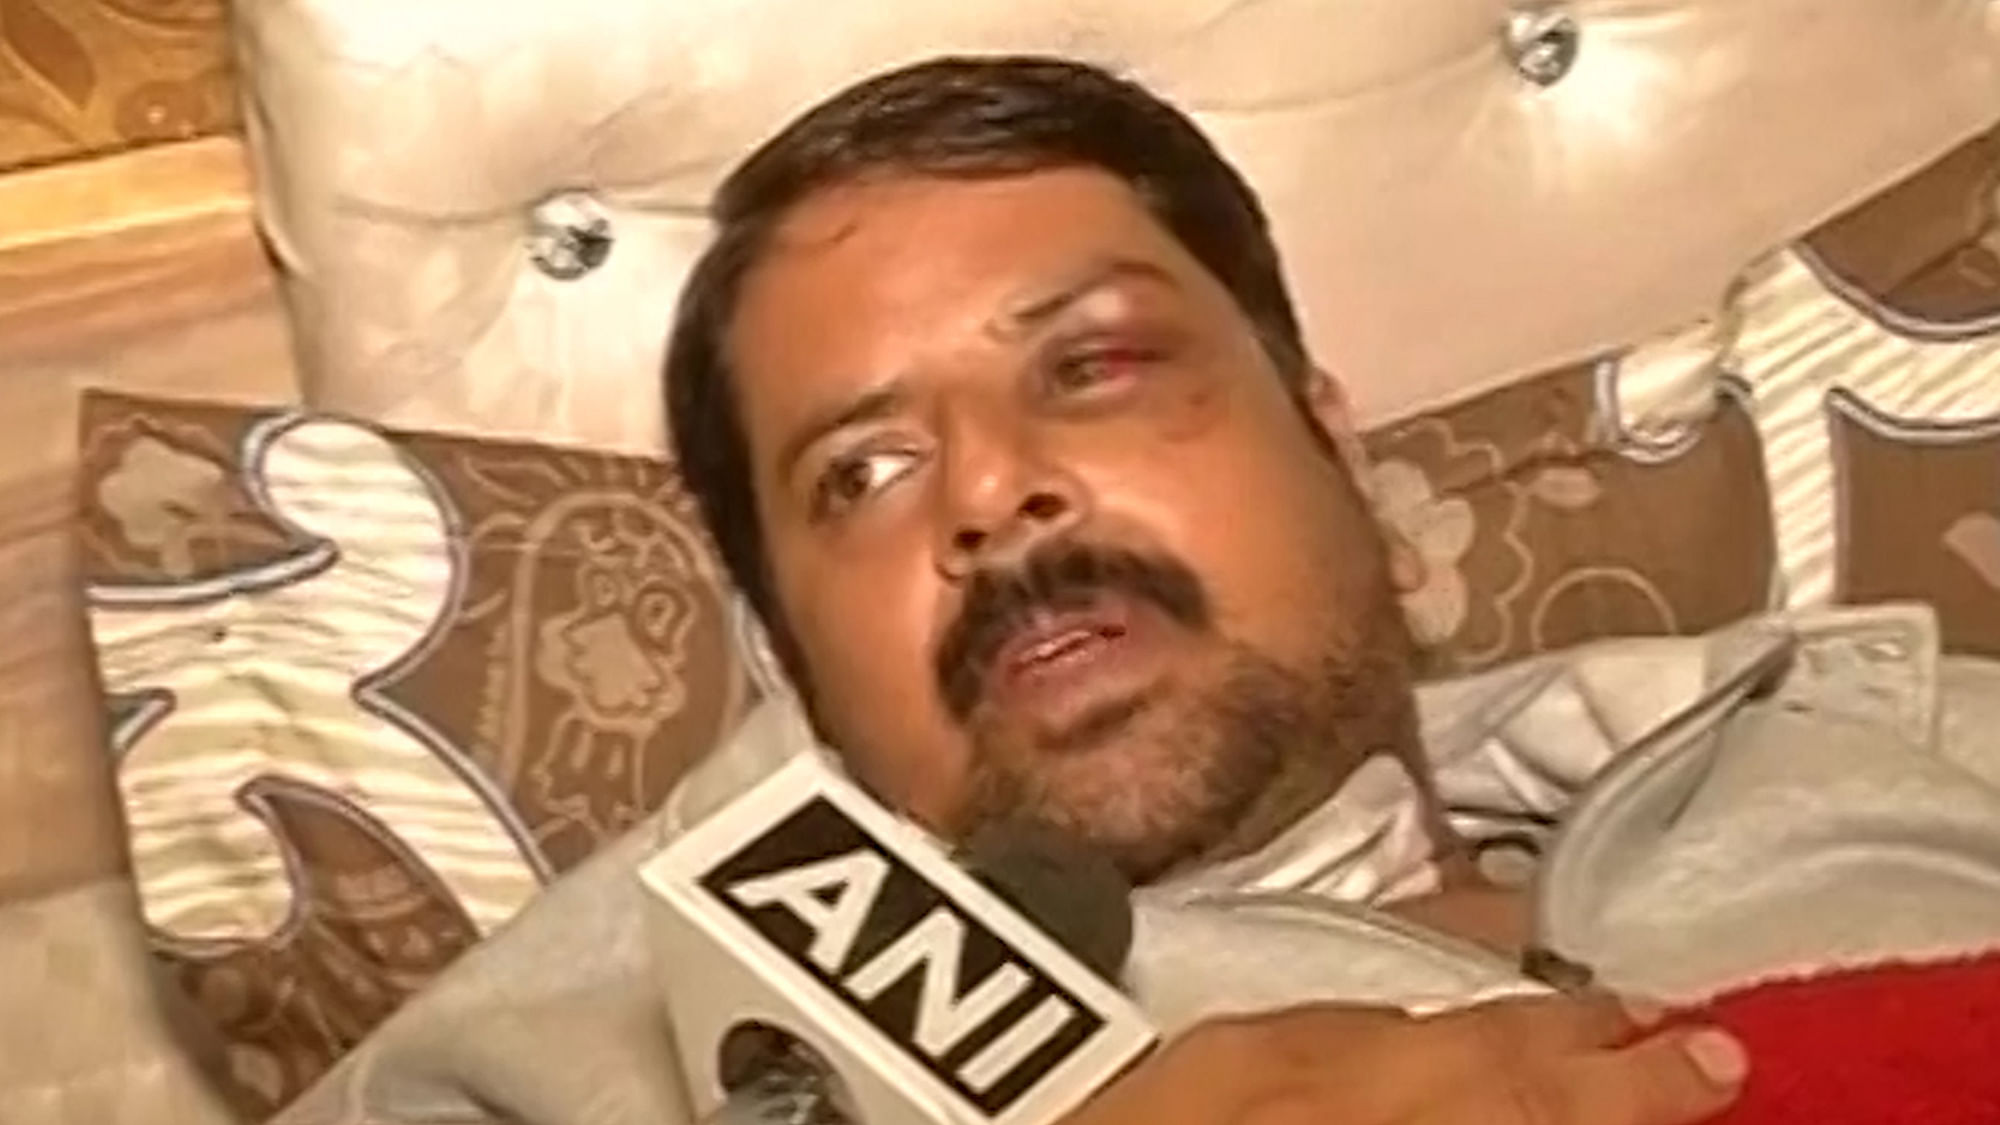 Rajesh Verma, who was abducted along with Gurdaspur SP Salwinder Singh, recounts the horror. (Photo: ANI screengrab)